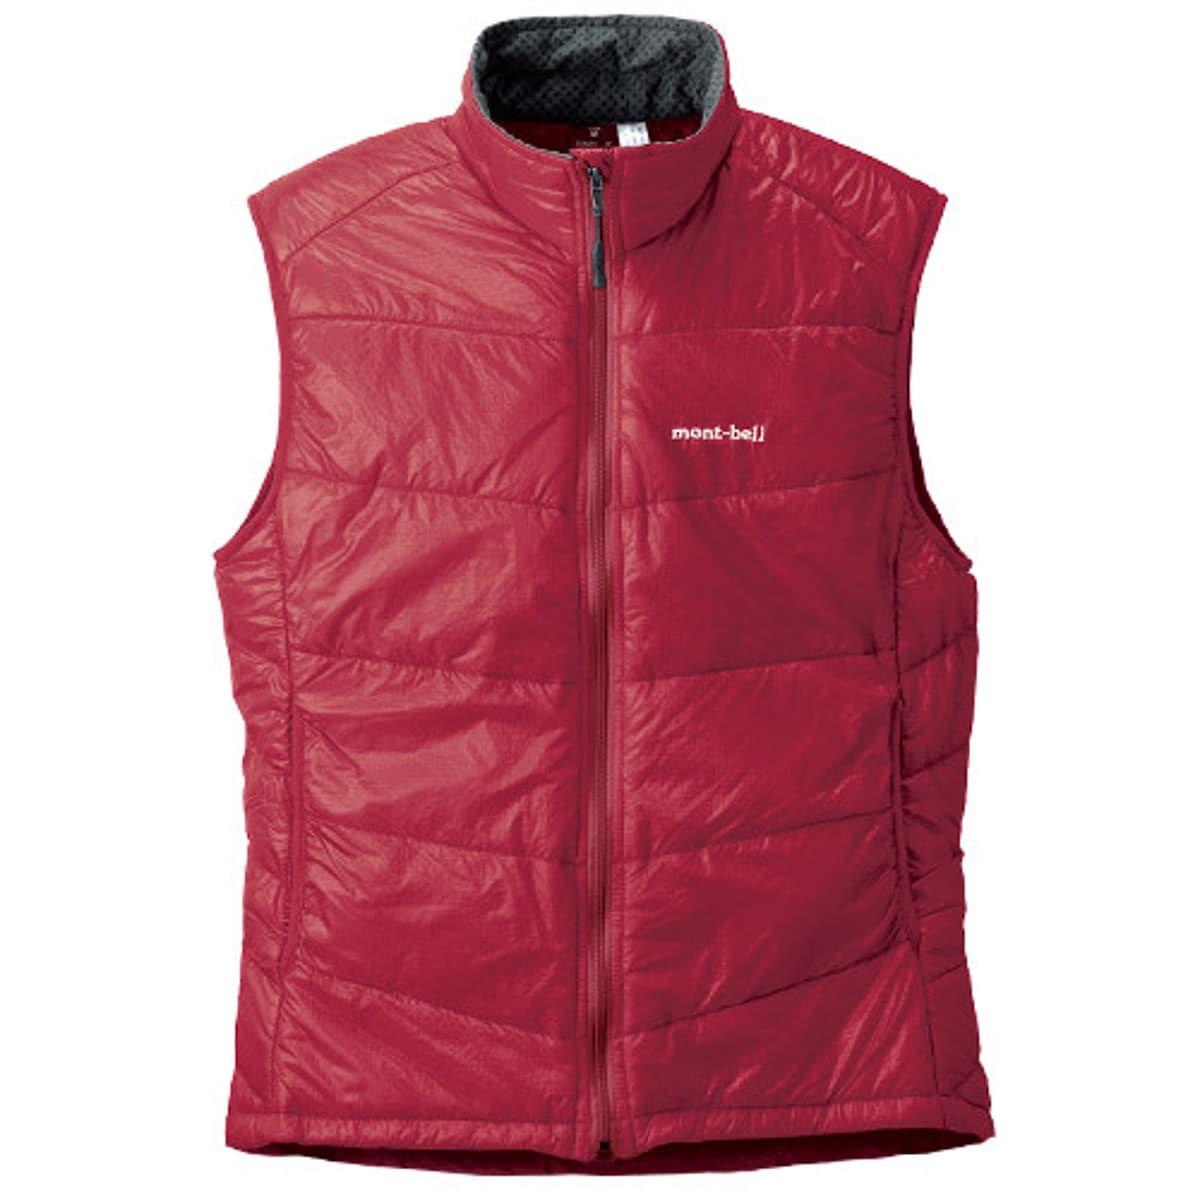 MontBell Ultralight Thermawrap Insulated Vest - Women's - Clothing